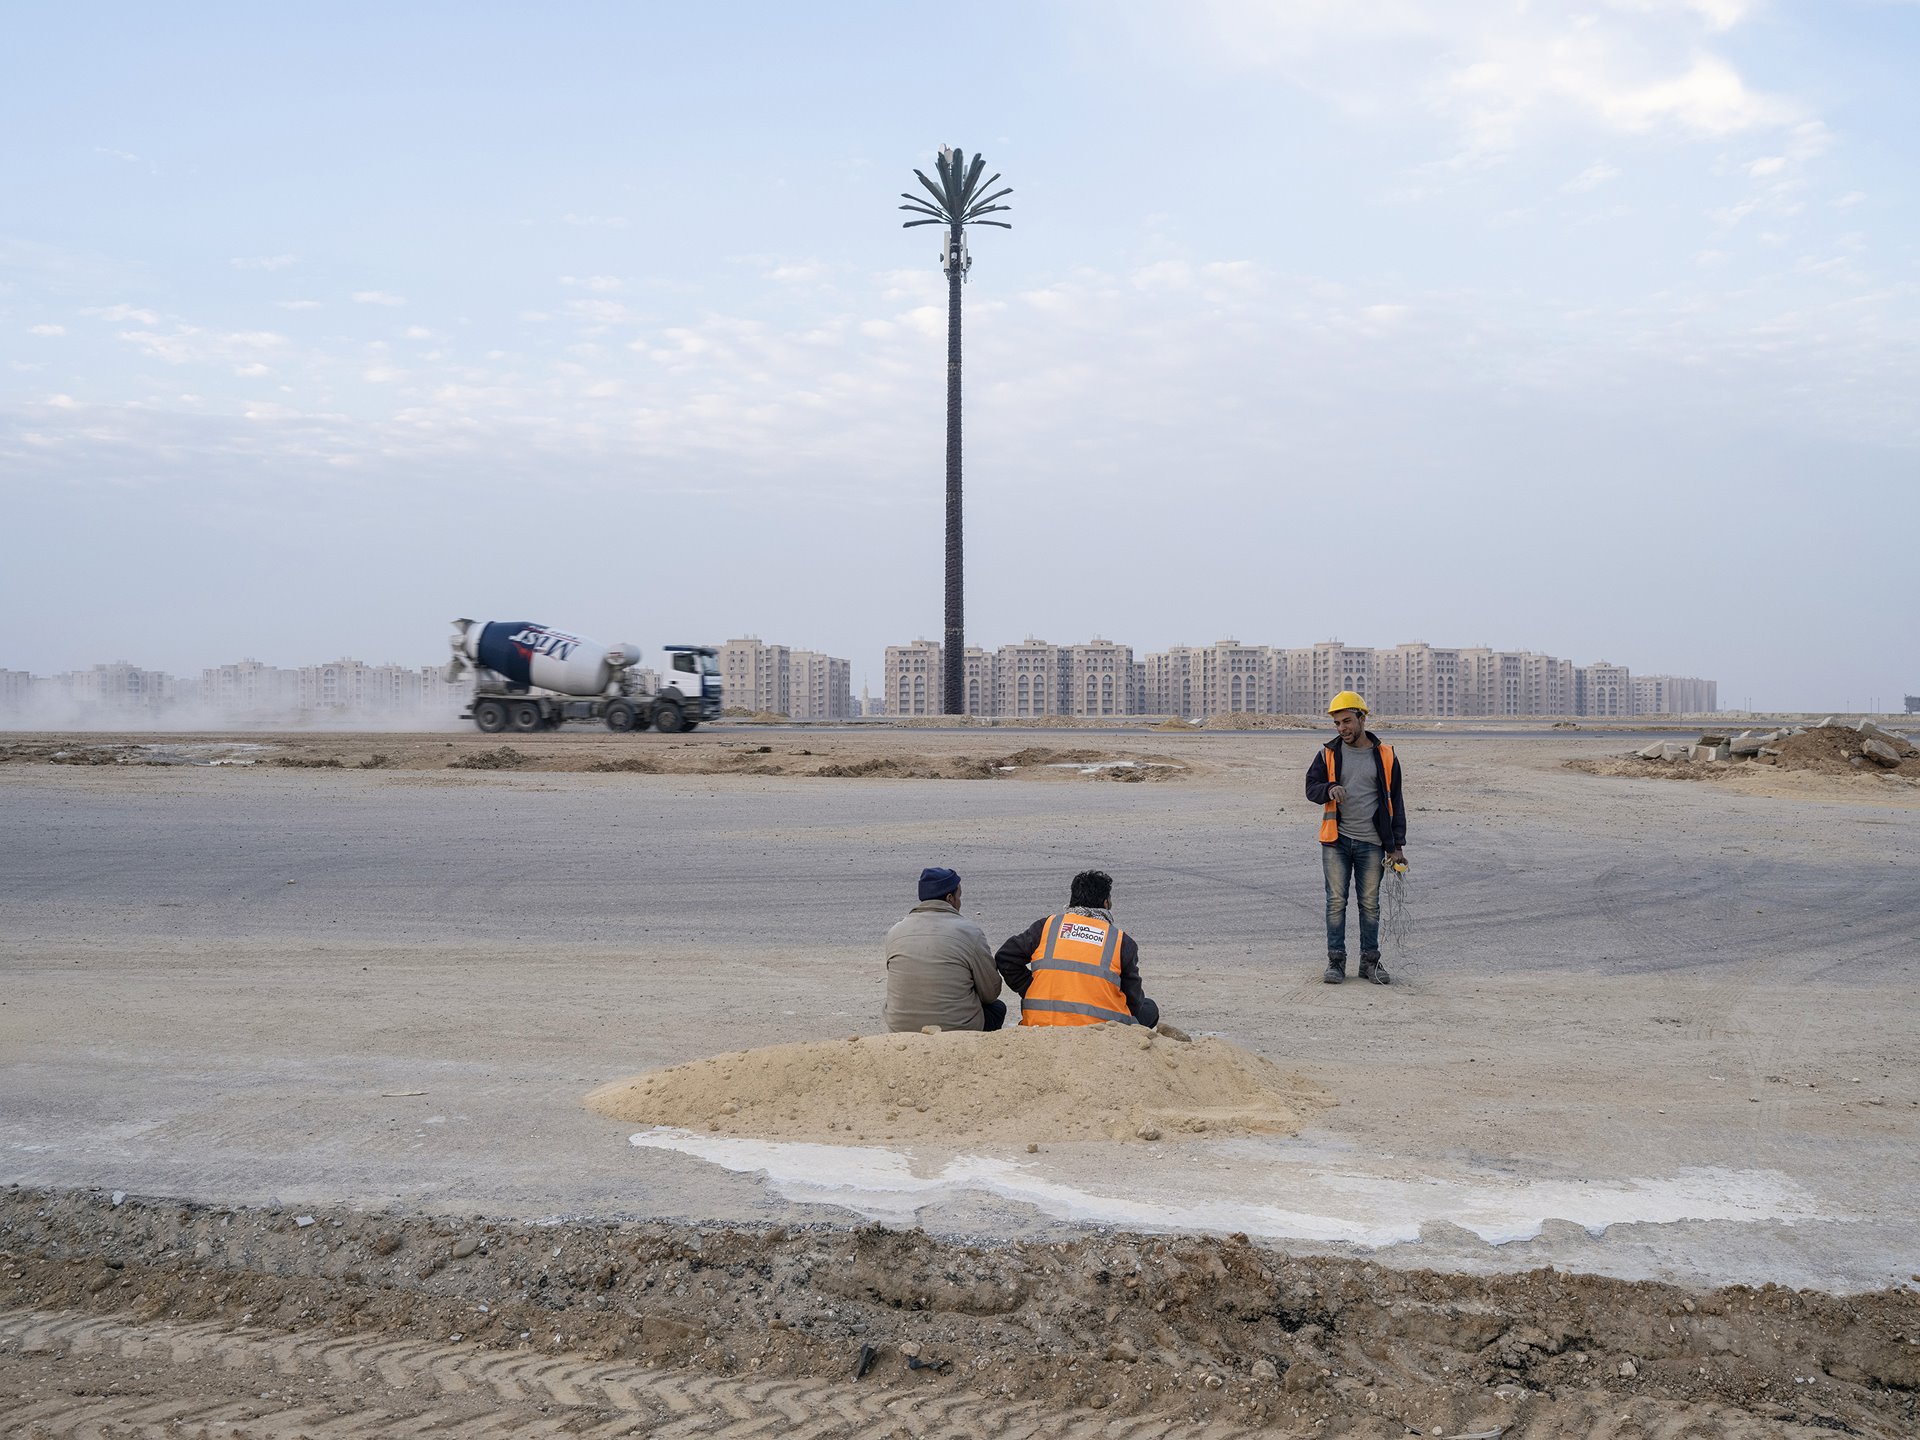 A mobile phone network antenna disguised as a palm tree rises in front of the Second Residential Neighbourhood (R2), north of Capital Park, in Egypt&#39;s New Administrative Capital, under construction near Cairo.